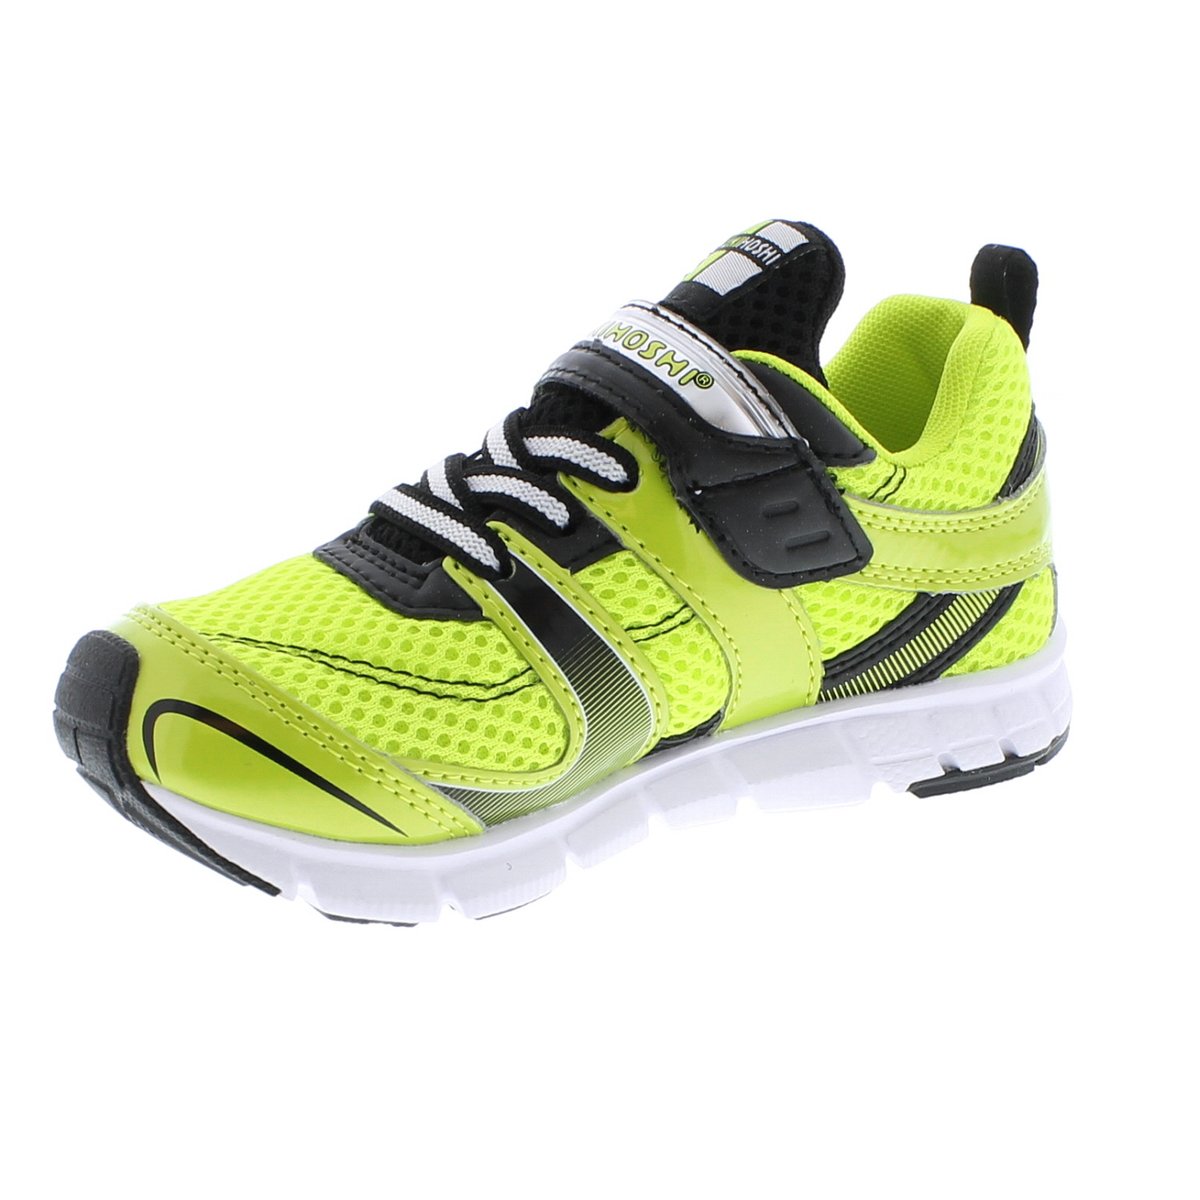 Child Tsukihoshi Velocity Sneaker in Lime/Black from the front view